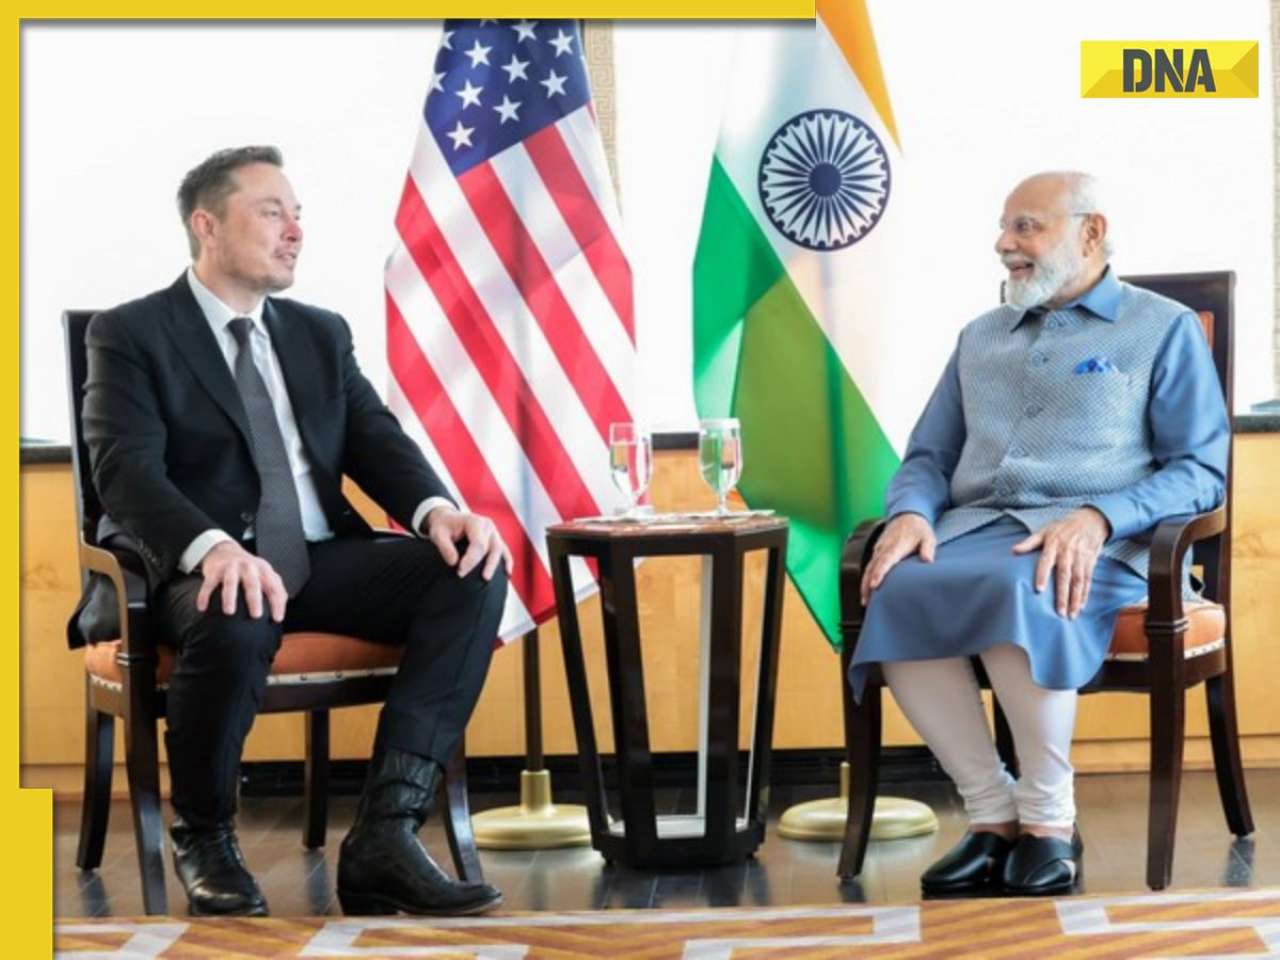 ‘Whoever wishes to invest can, but…’: PM Modi on Elon Musk’s India plans